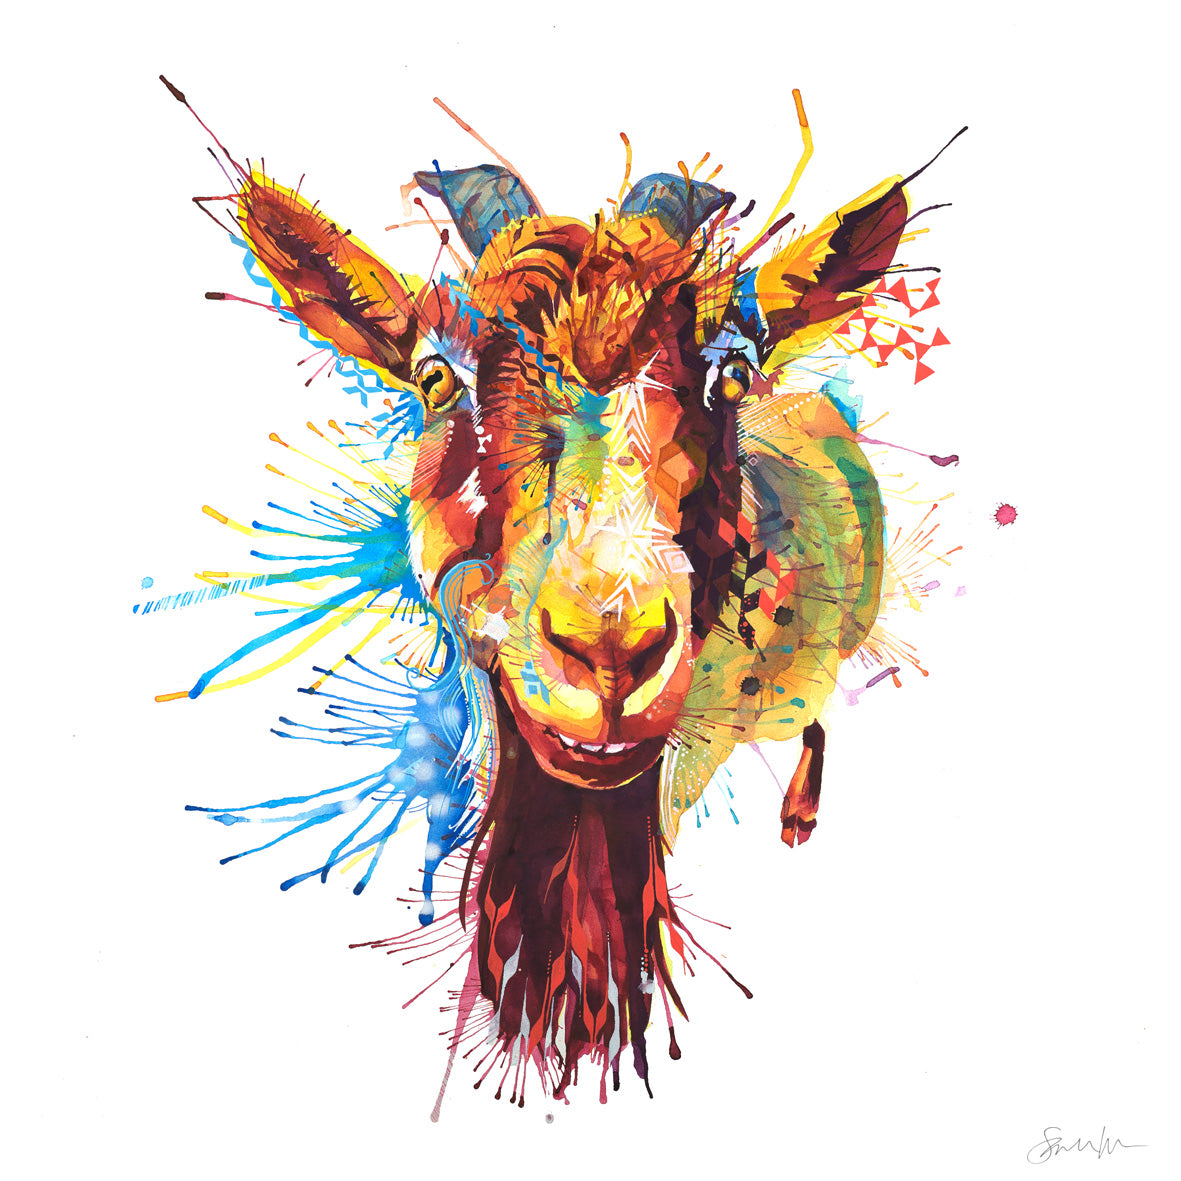 Goat Wall Art | Wallart | Animal Picture | Funny Animal Pictures | Wall Art On Canvases